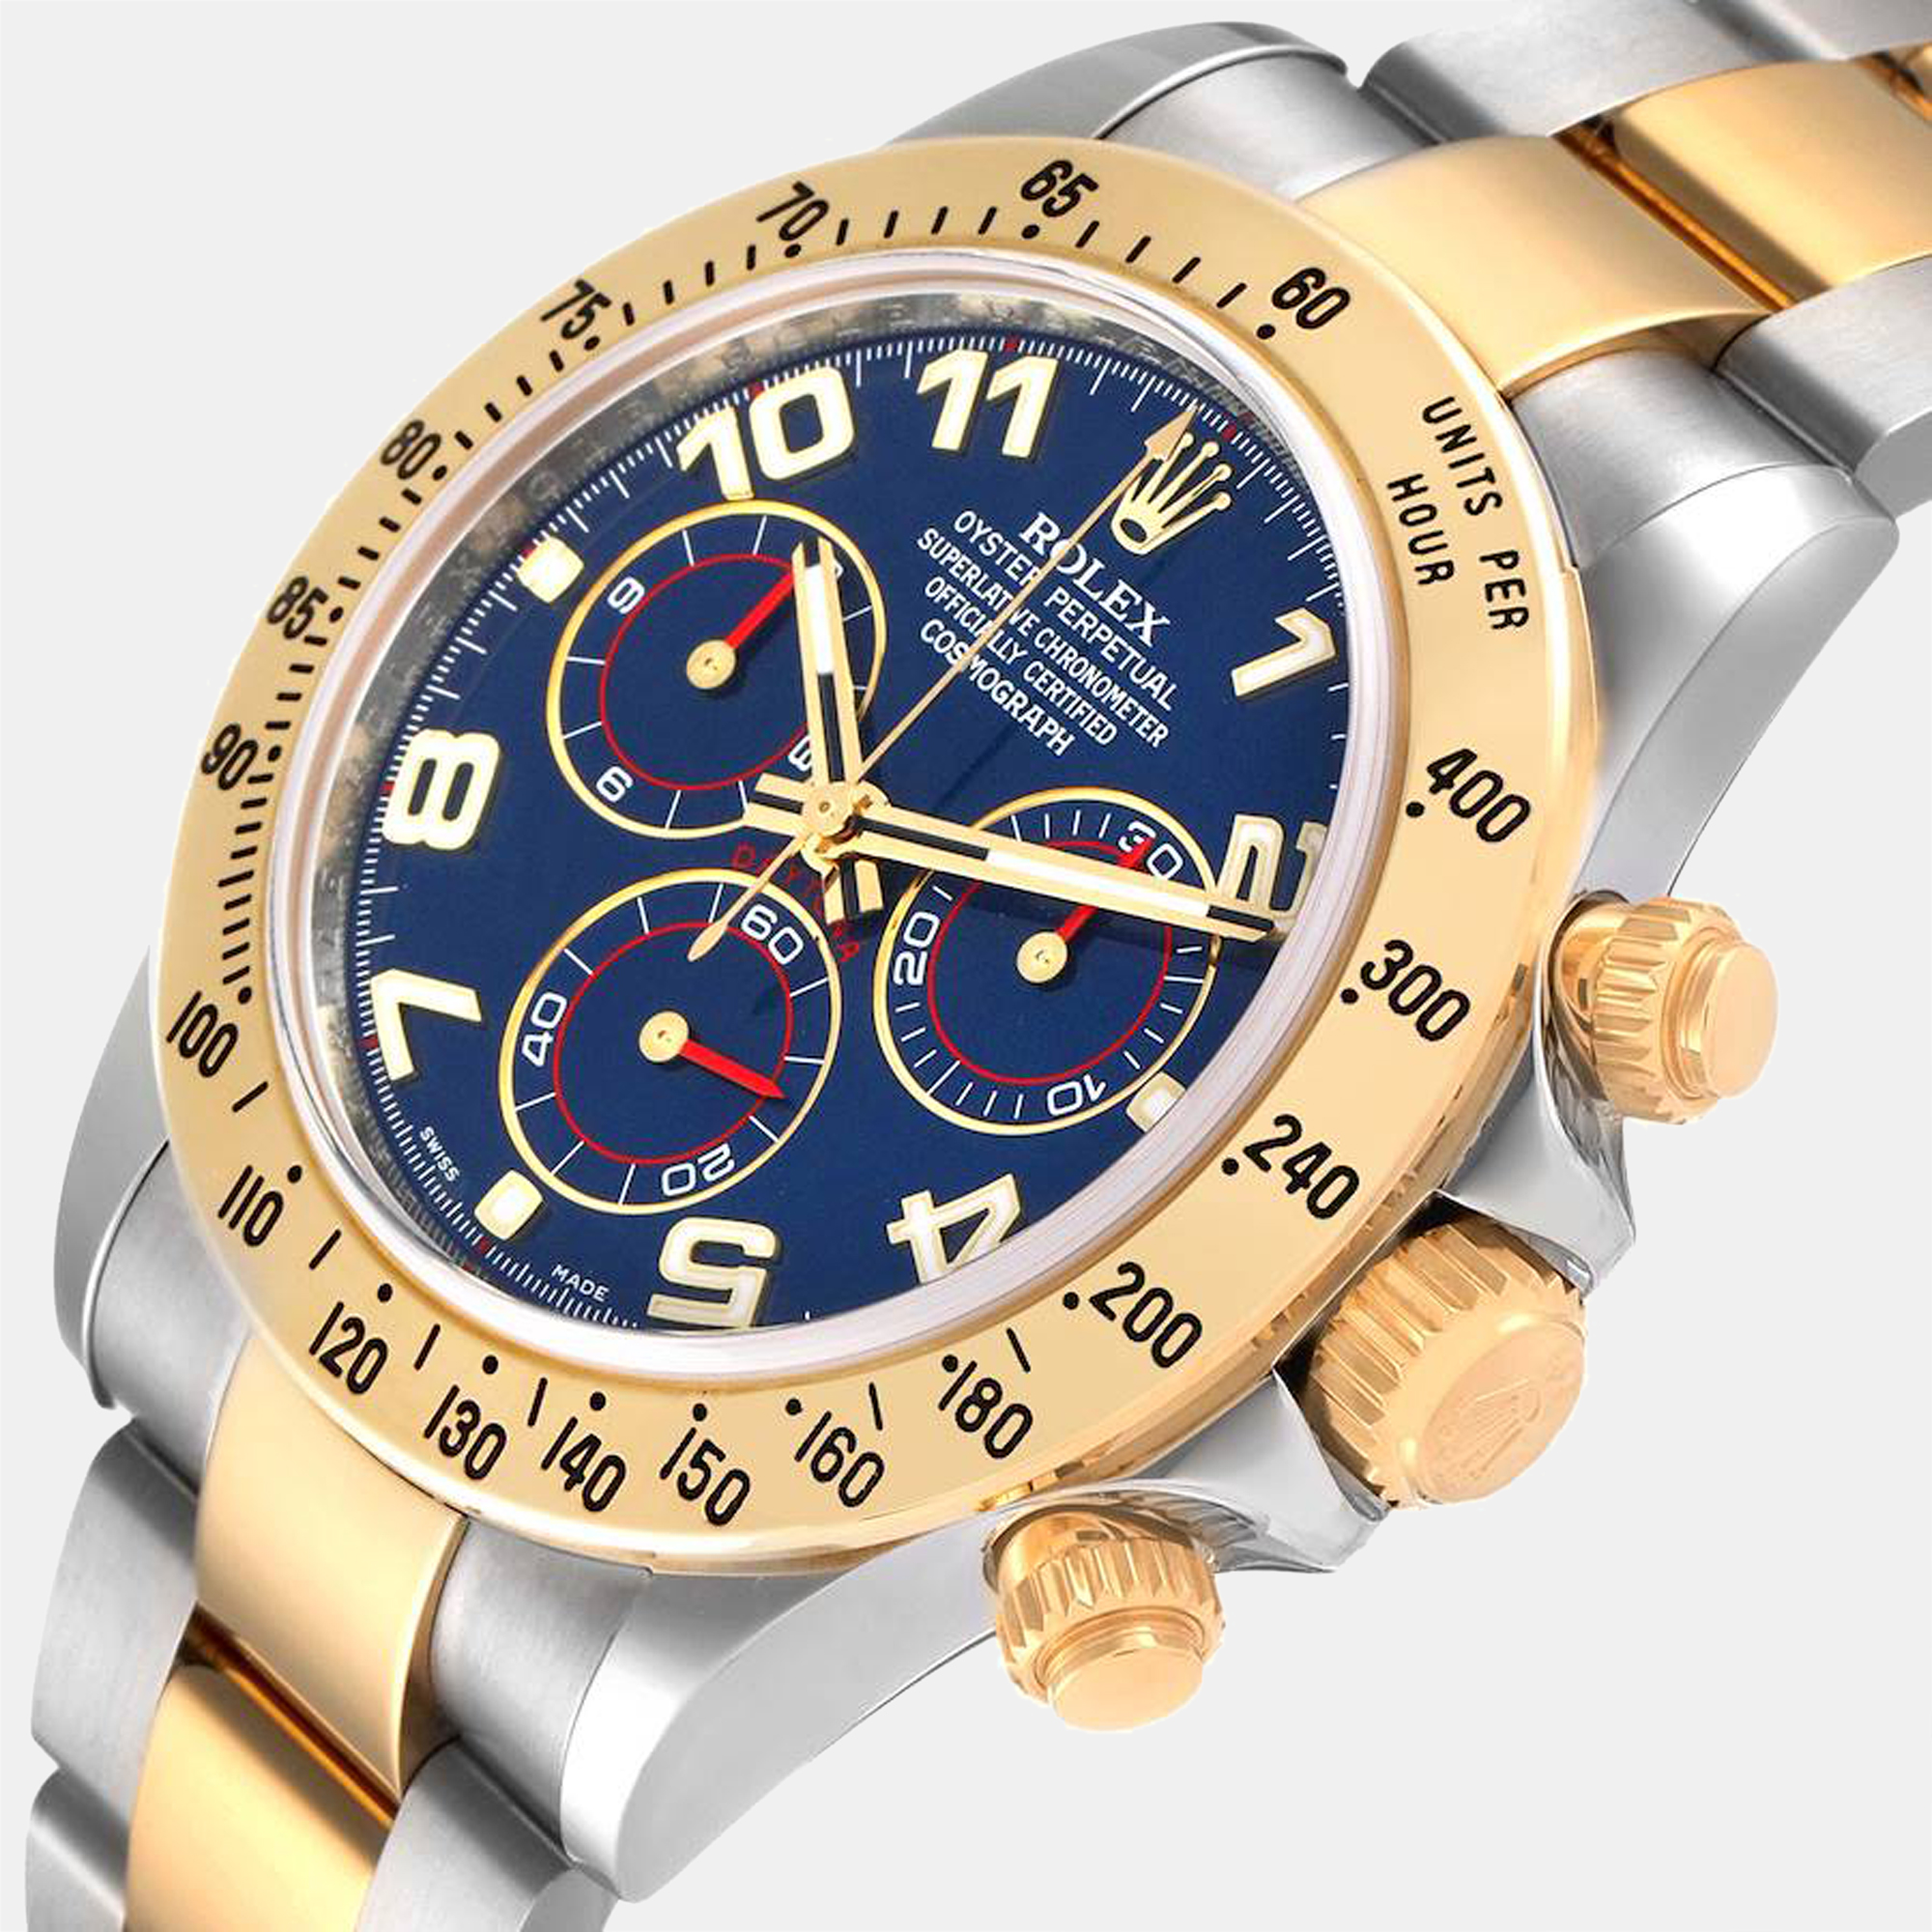 

Rolex Blue 18K Yellow Gold And Stainless Steel Cosmograph Daytona 116523 Automatic Men's Wristwatch 40 mm